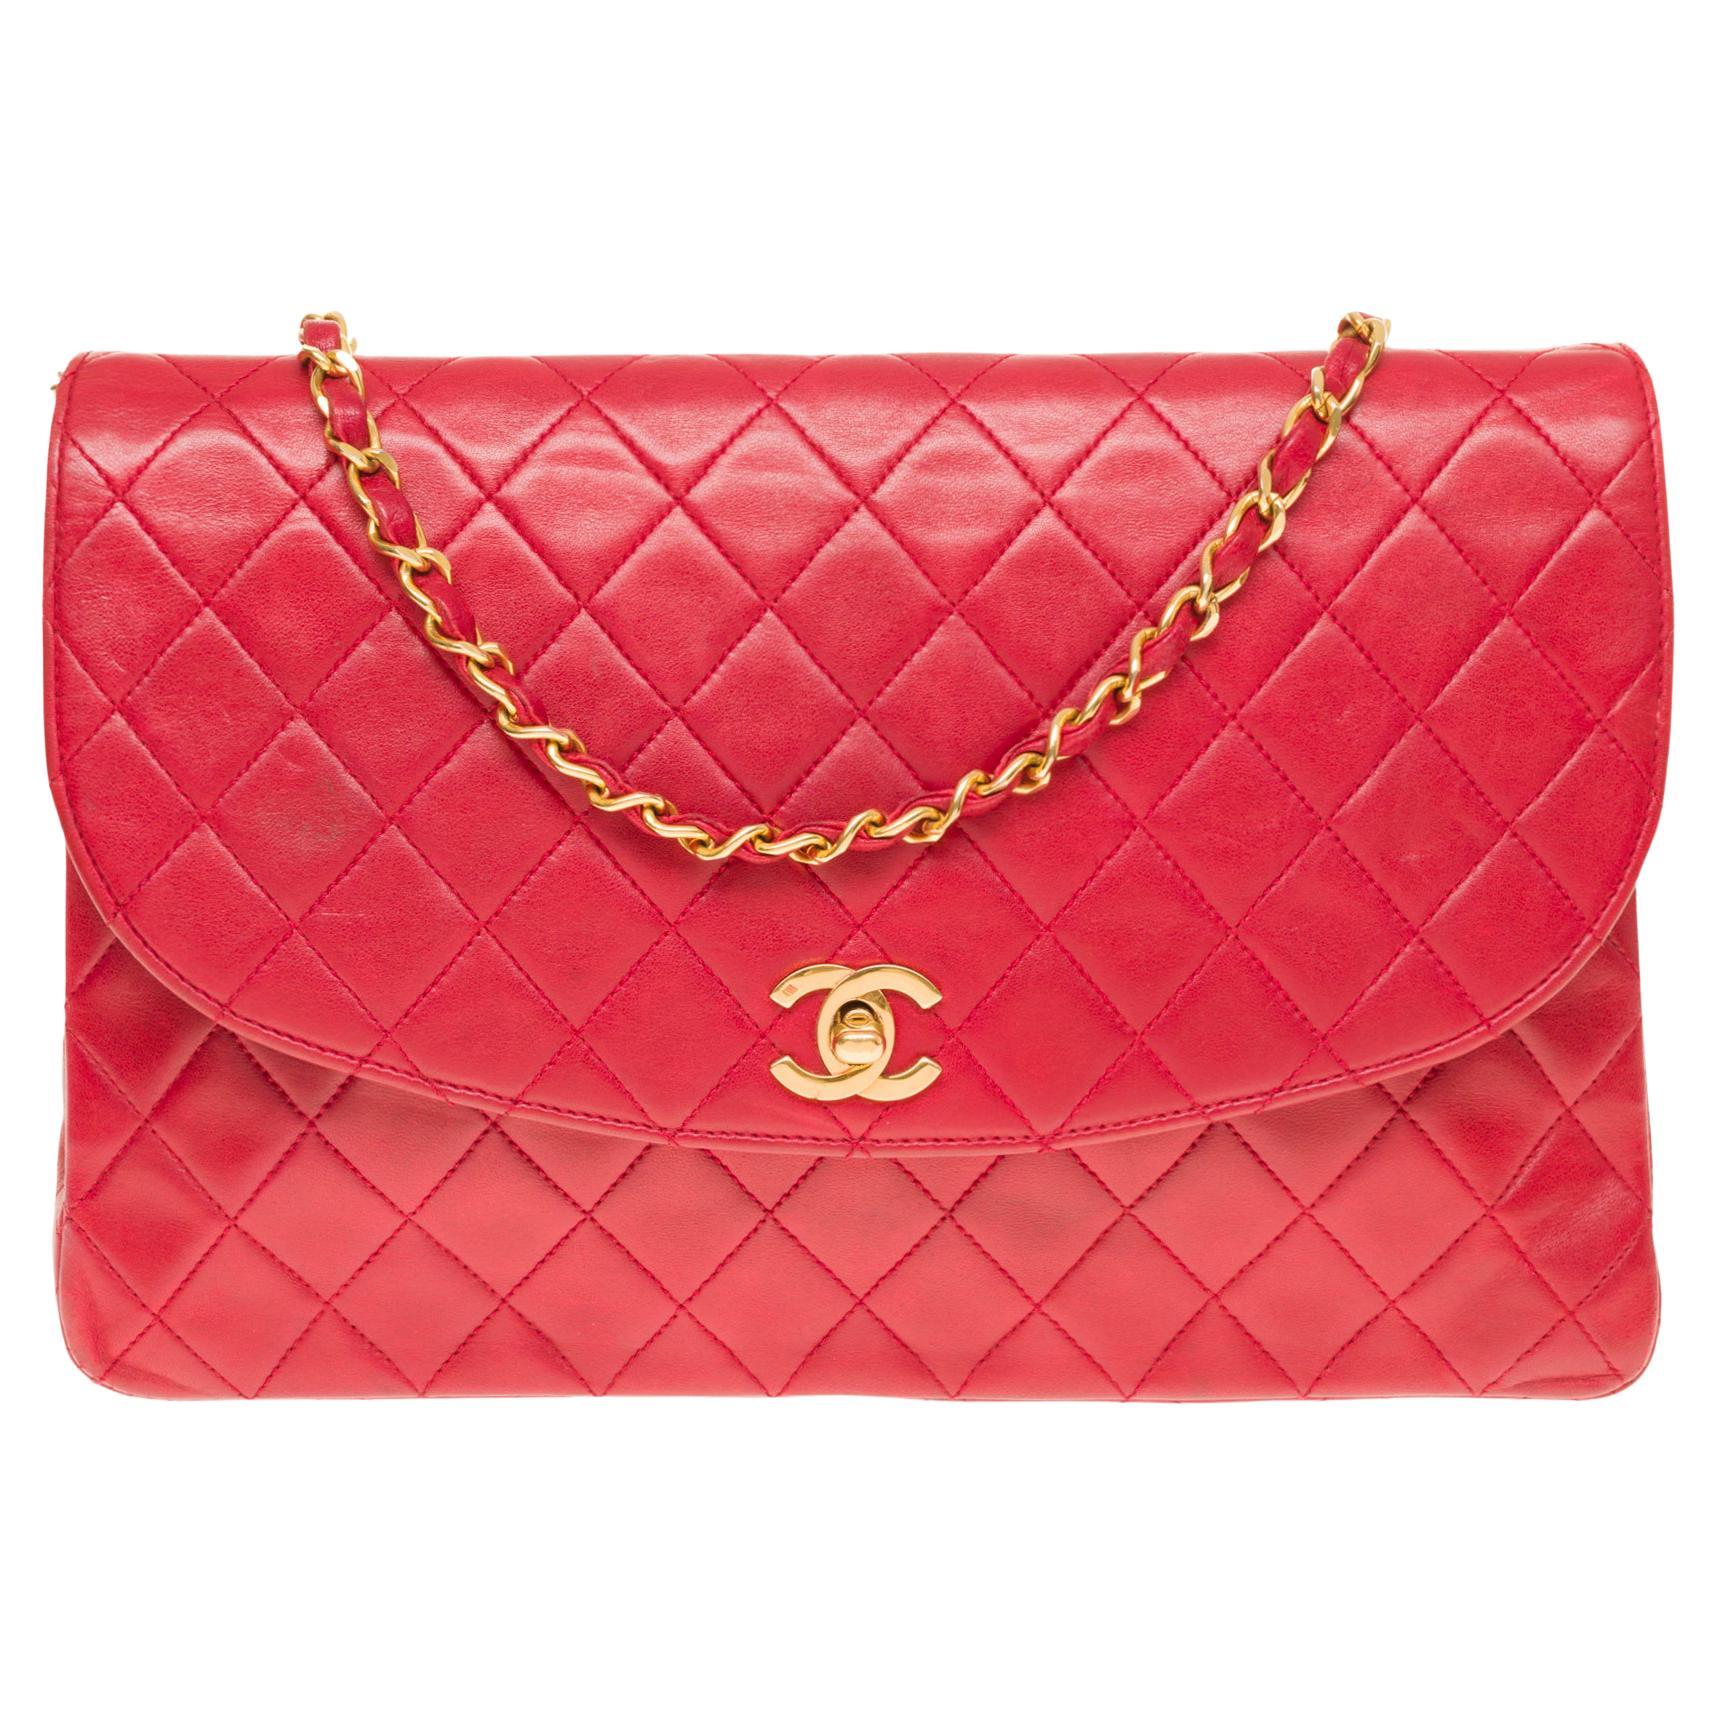 Chanel Classic Single Flap shoulder bag in Red quilted lambskin, GHW